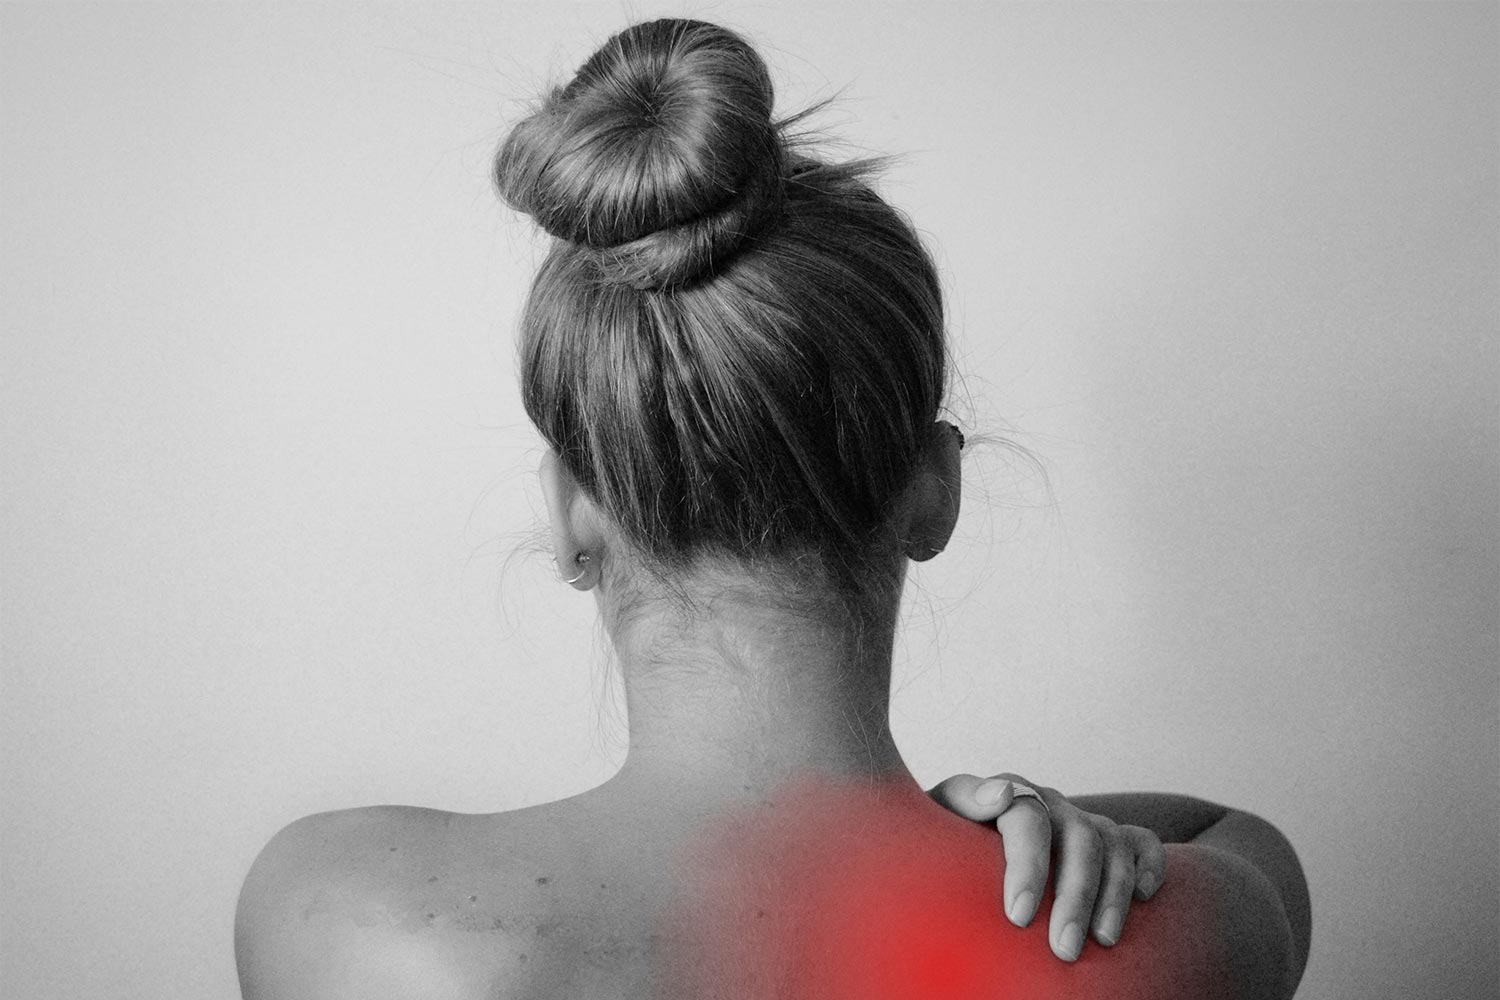 Person holding her shoulder with a red area marking the painful area